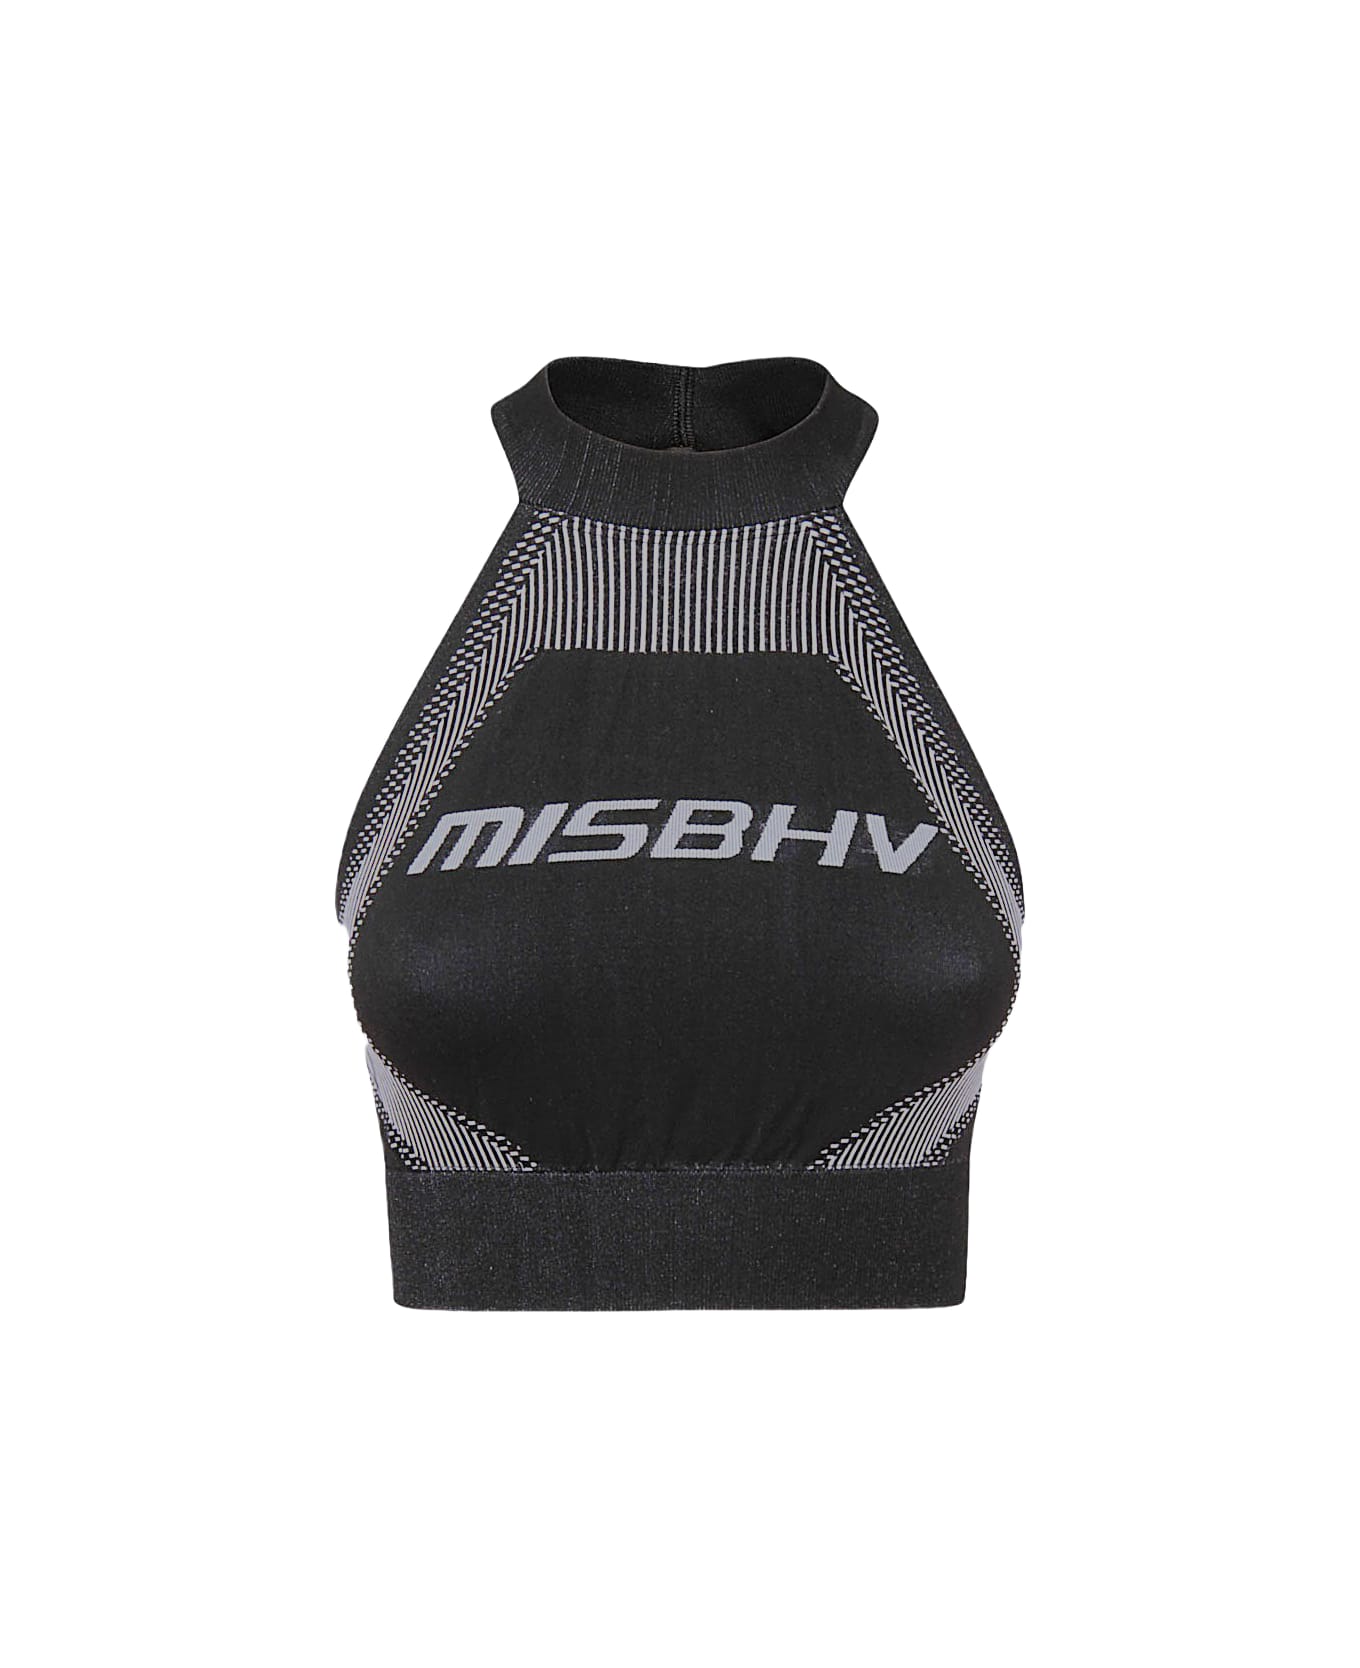 MISBHV Black And White Top - MUTED BLACK